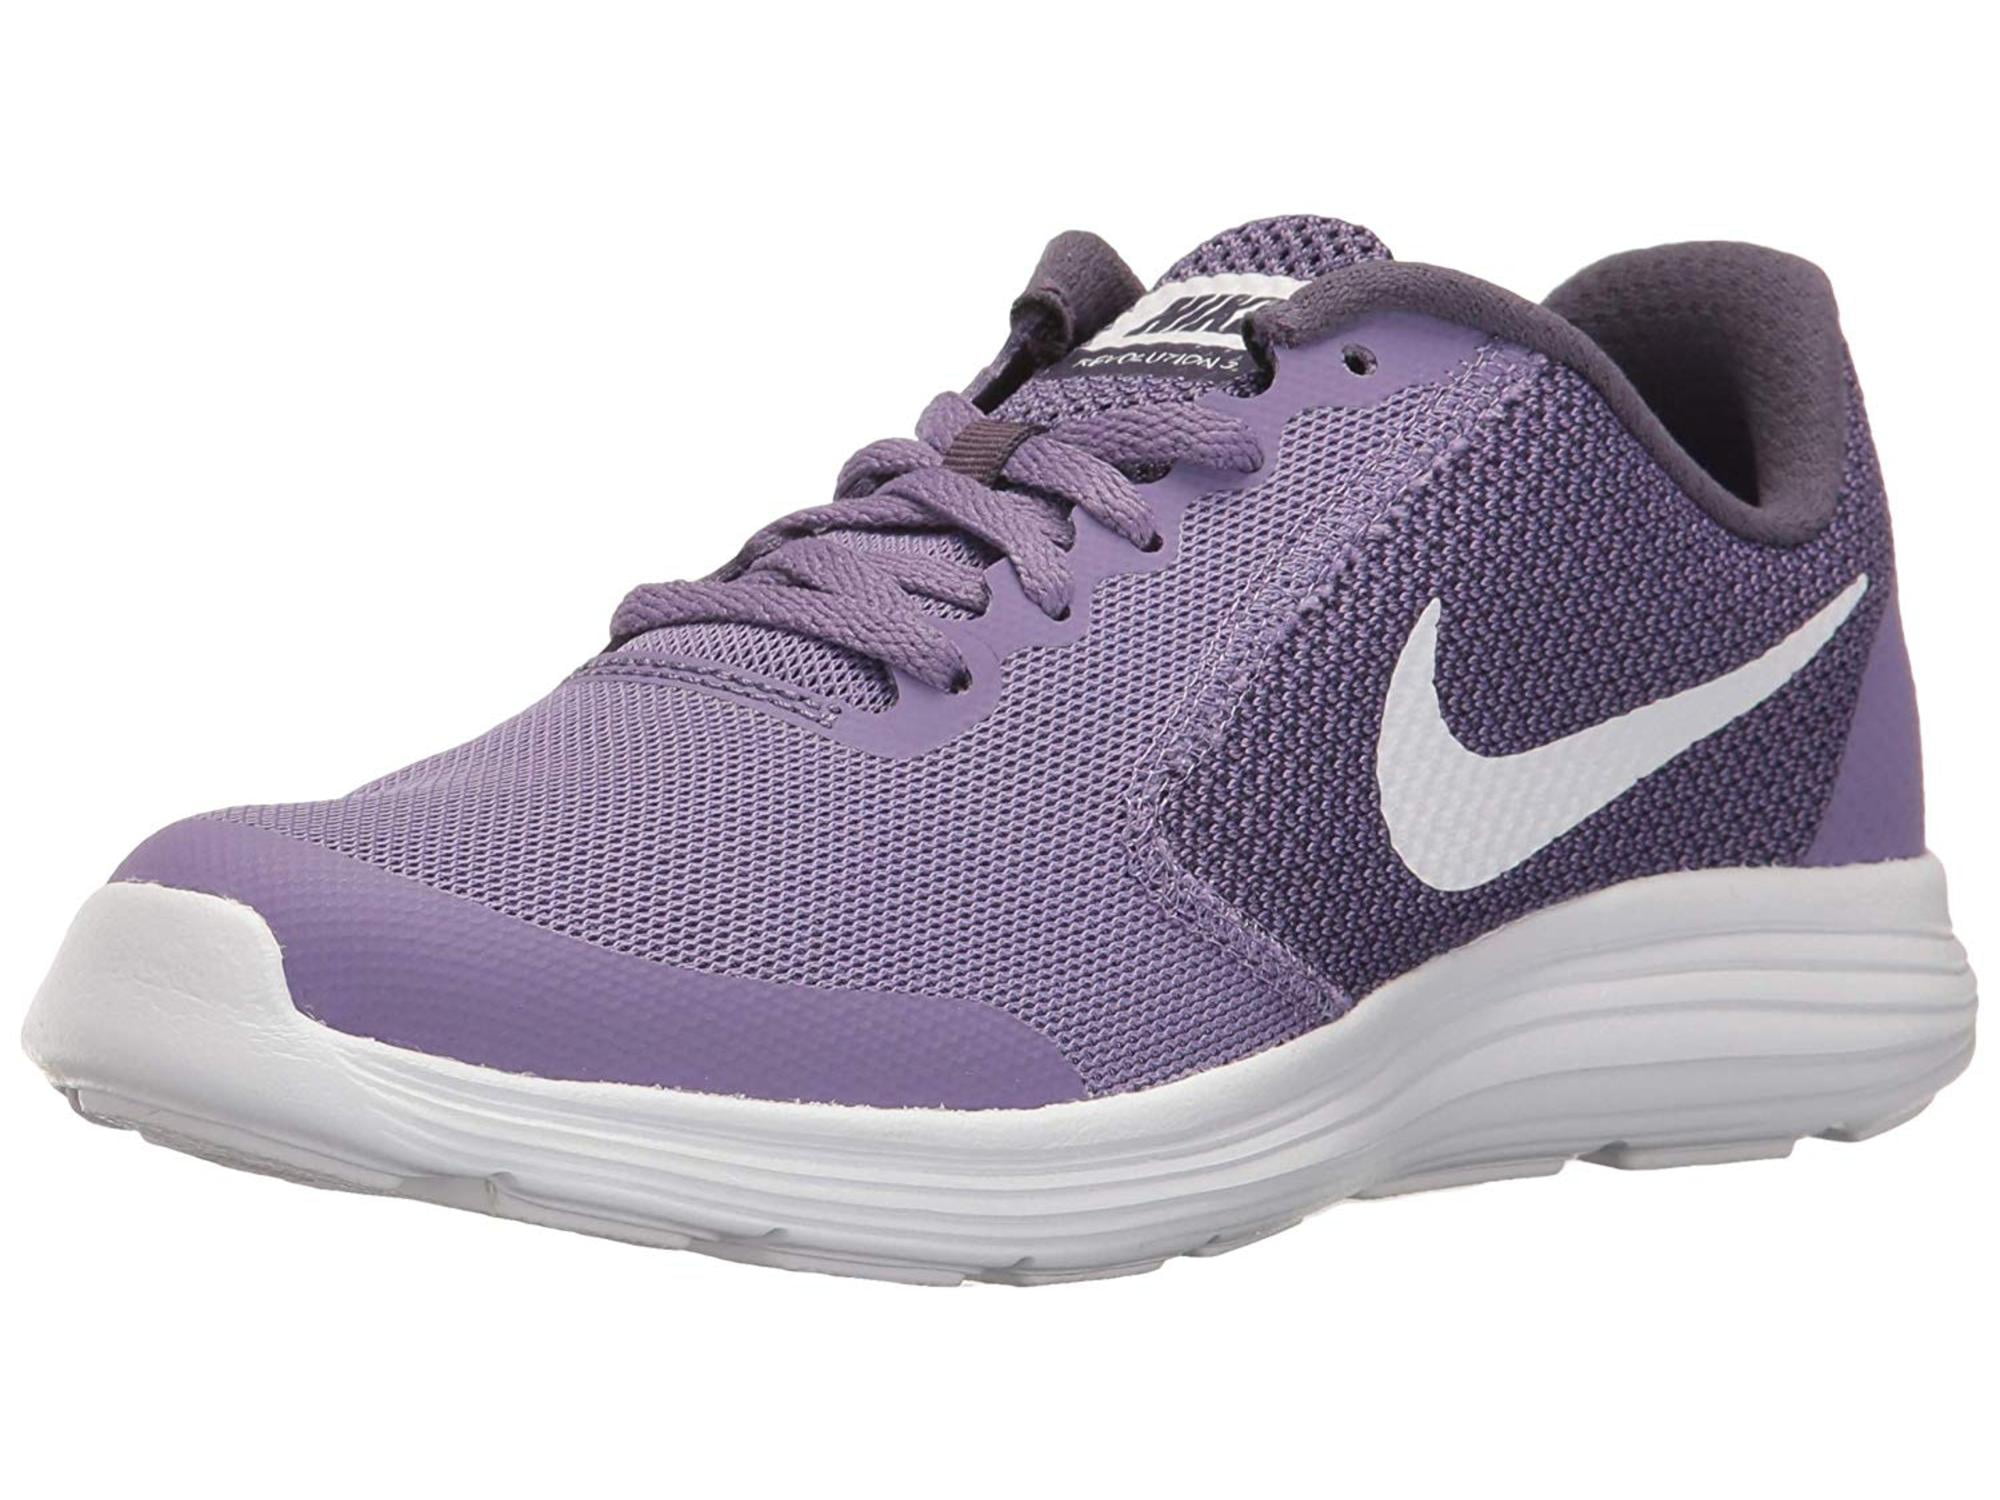 Gs) Running Shoes, Purple, Size 